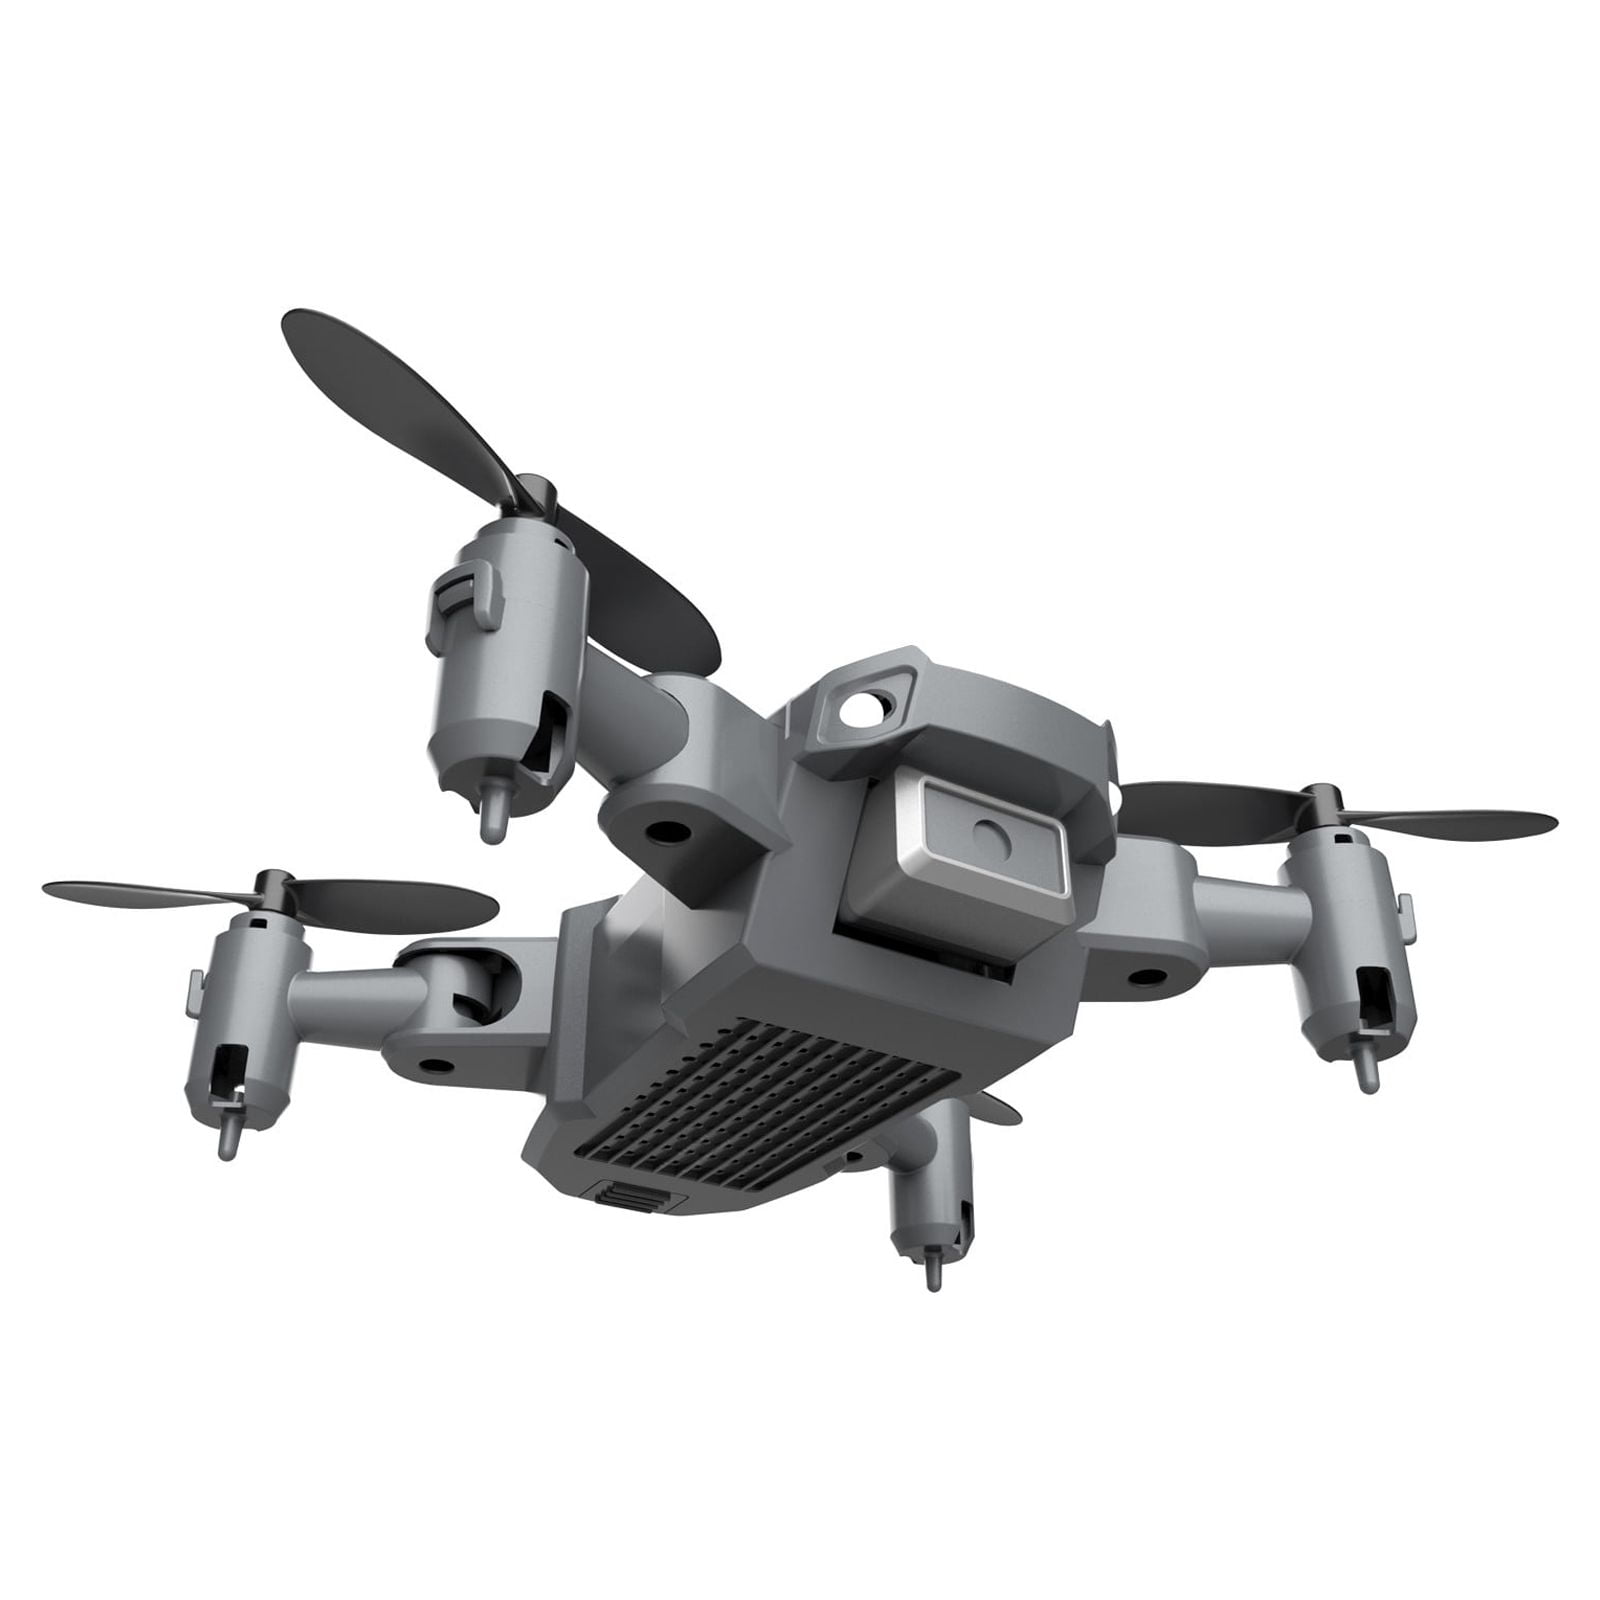 KY905 Foldable Mini WiFi FPV Aerial Photography Drone,, 49% OFF